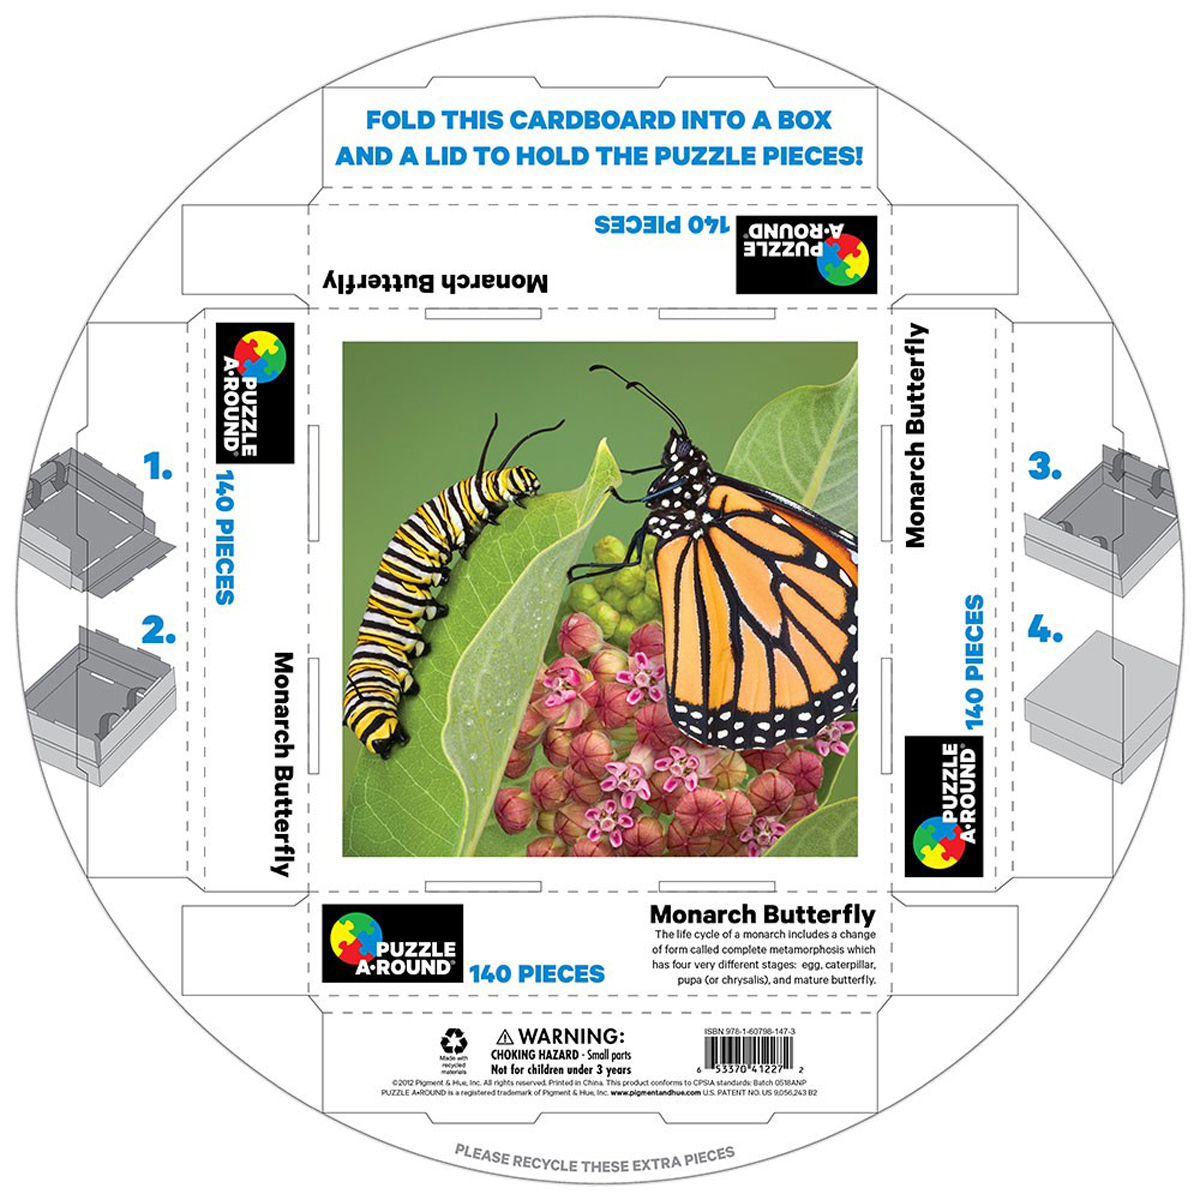 Monarch Butterfly Puzzle A•Round